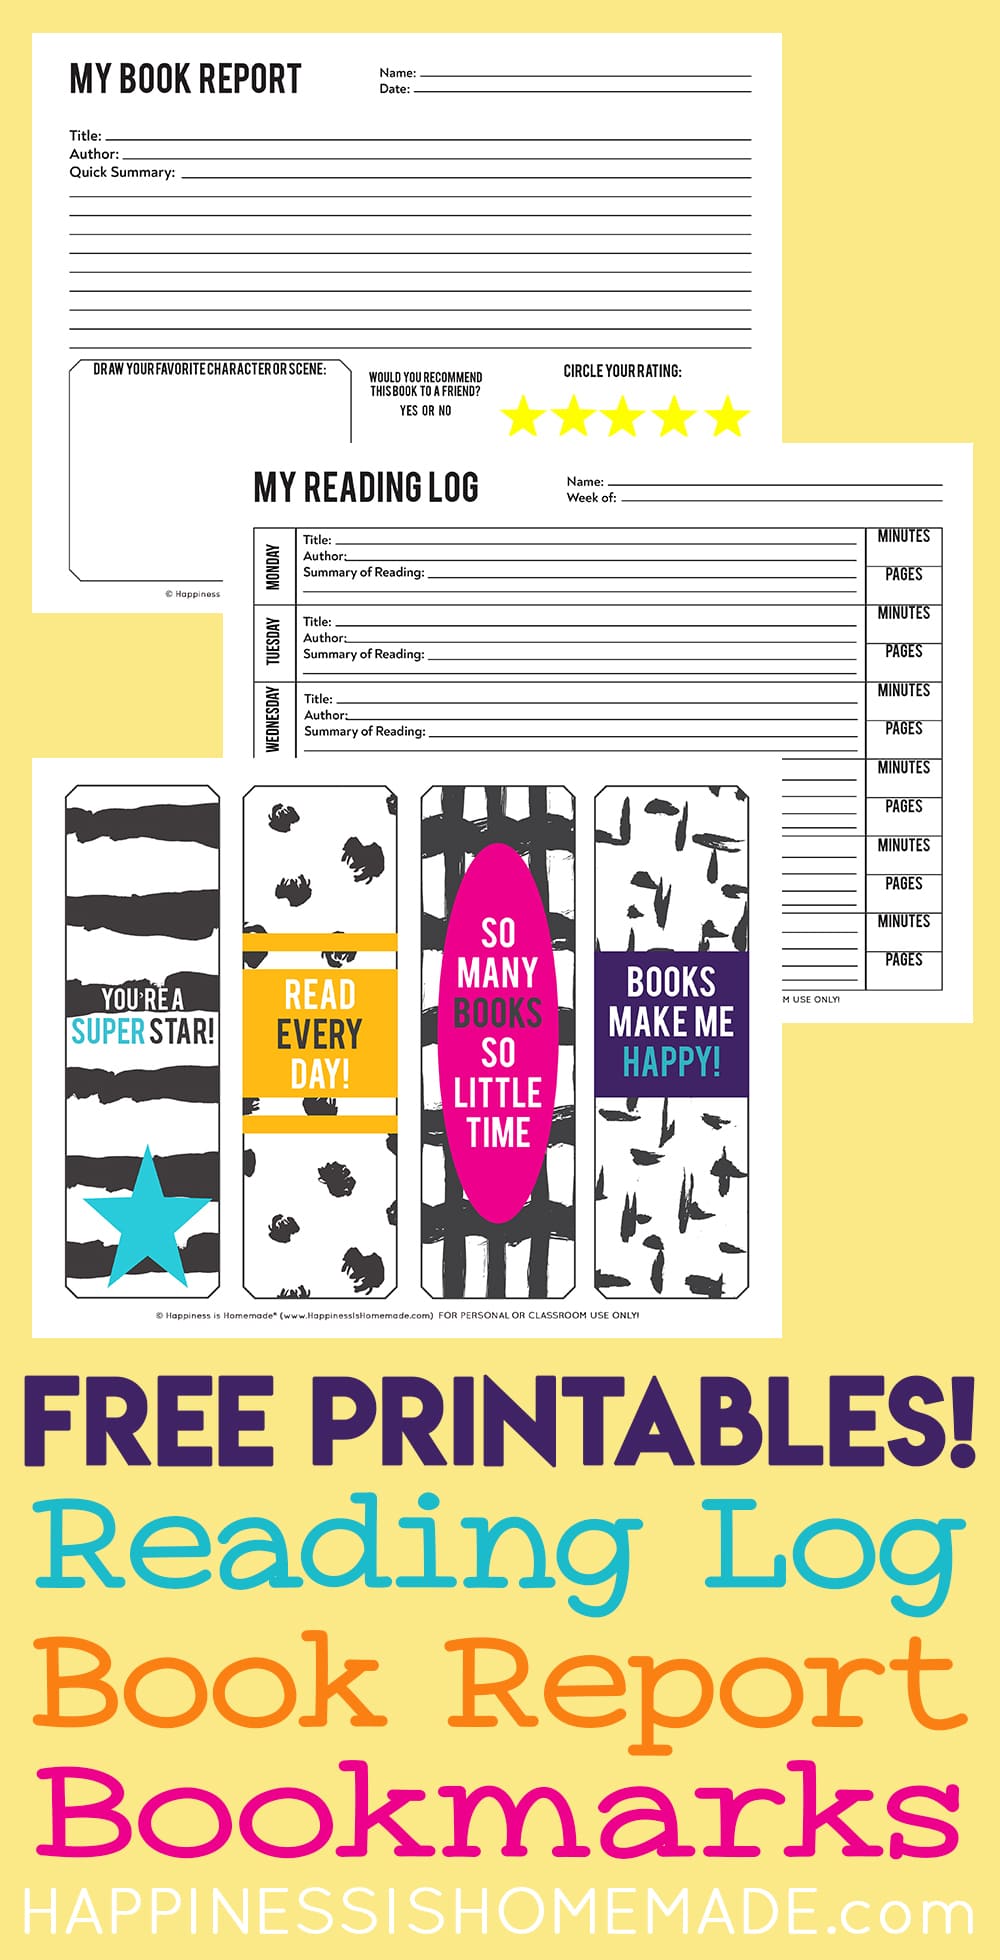 Printable reading log, book report, and bookmarks on yellow background